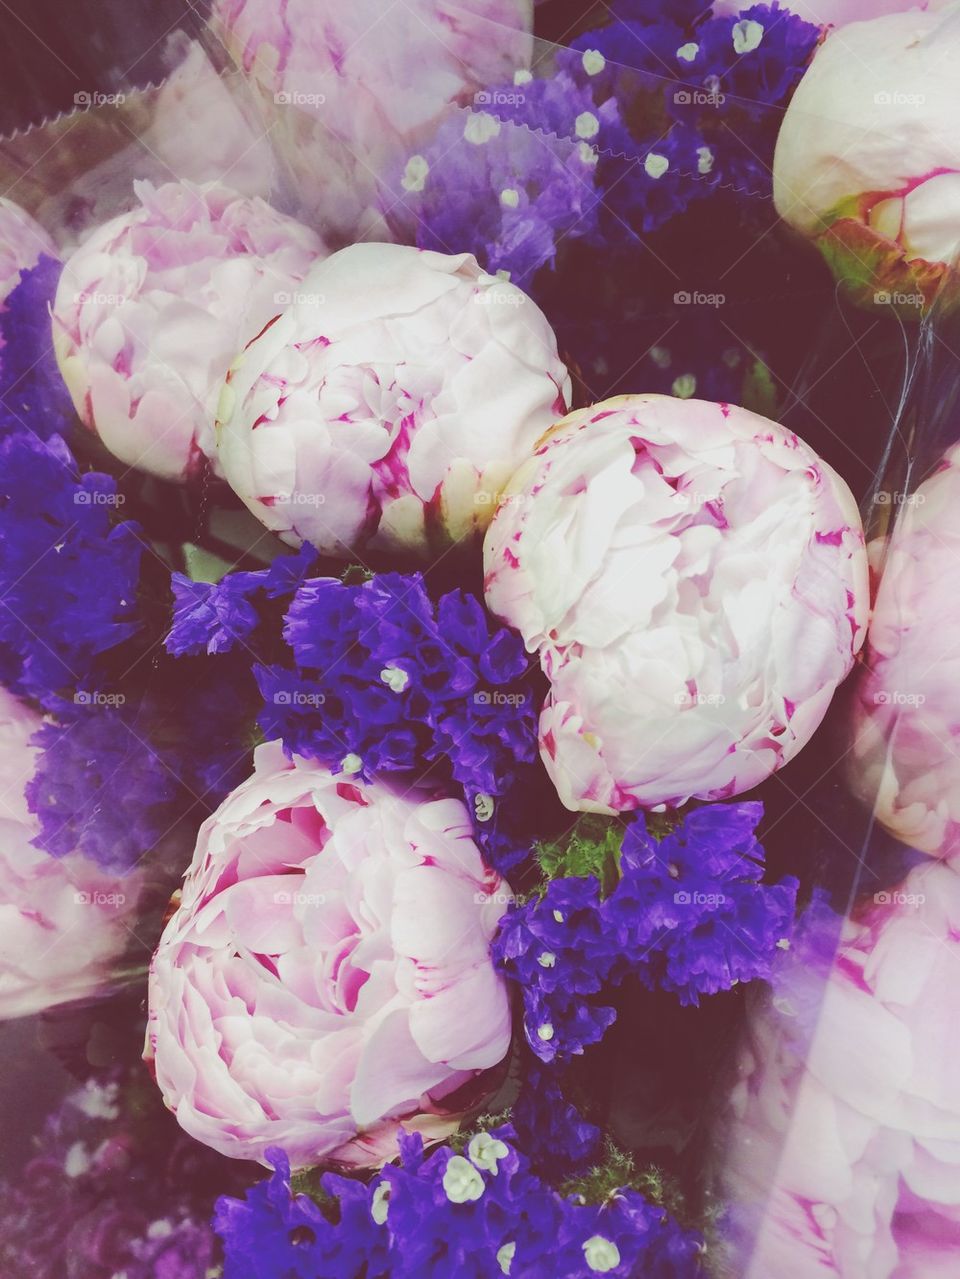 Peonies at the market